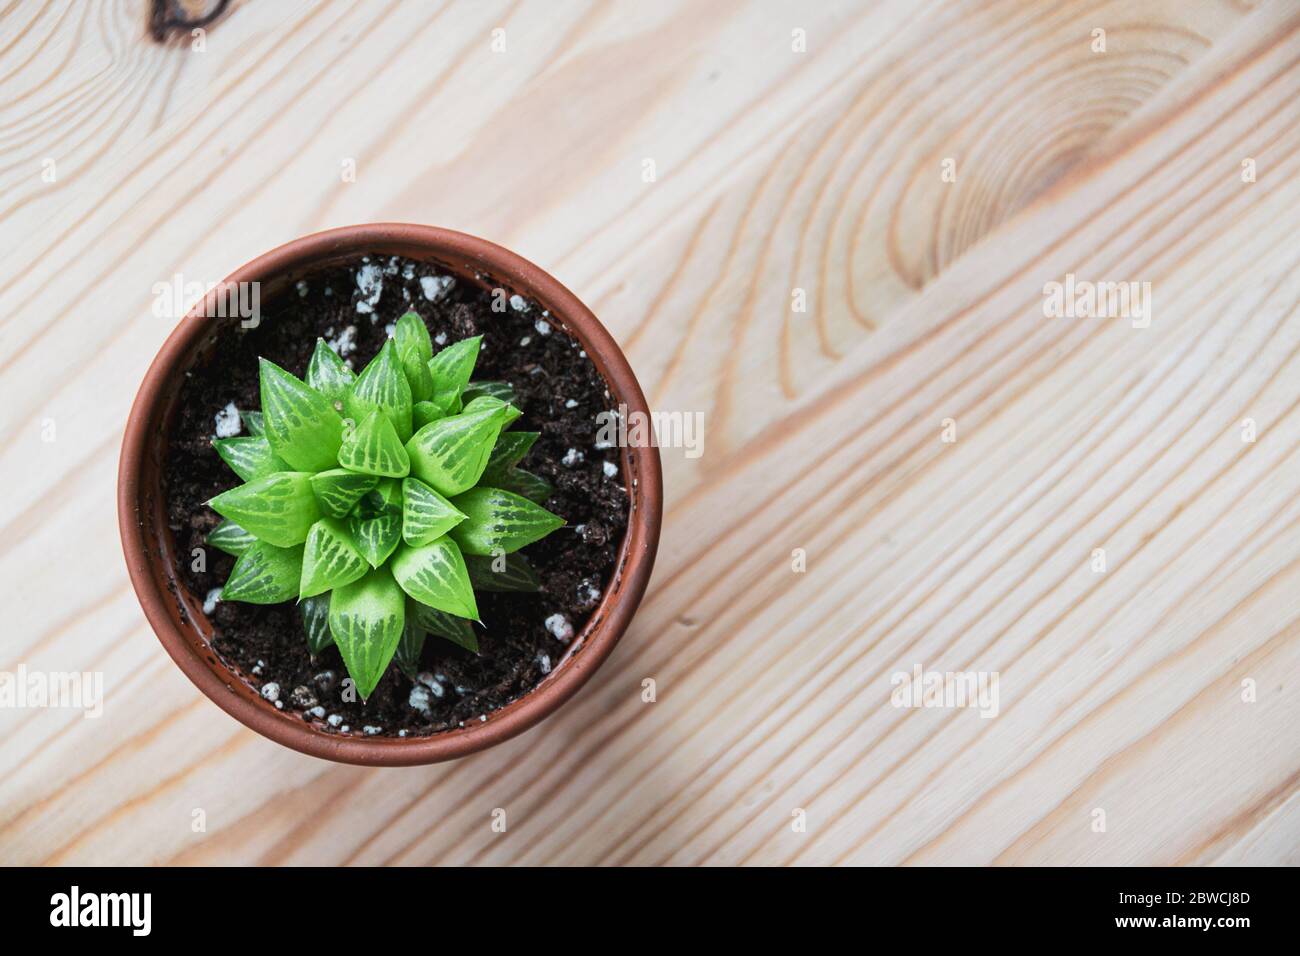 Top-down view of a small haworthia turgida succulent houseplant in terracotta pot on a light wooden table top. Patterned attractive small plant. Stock Photo